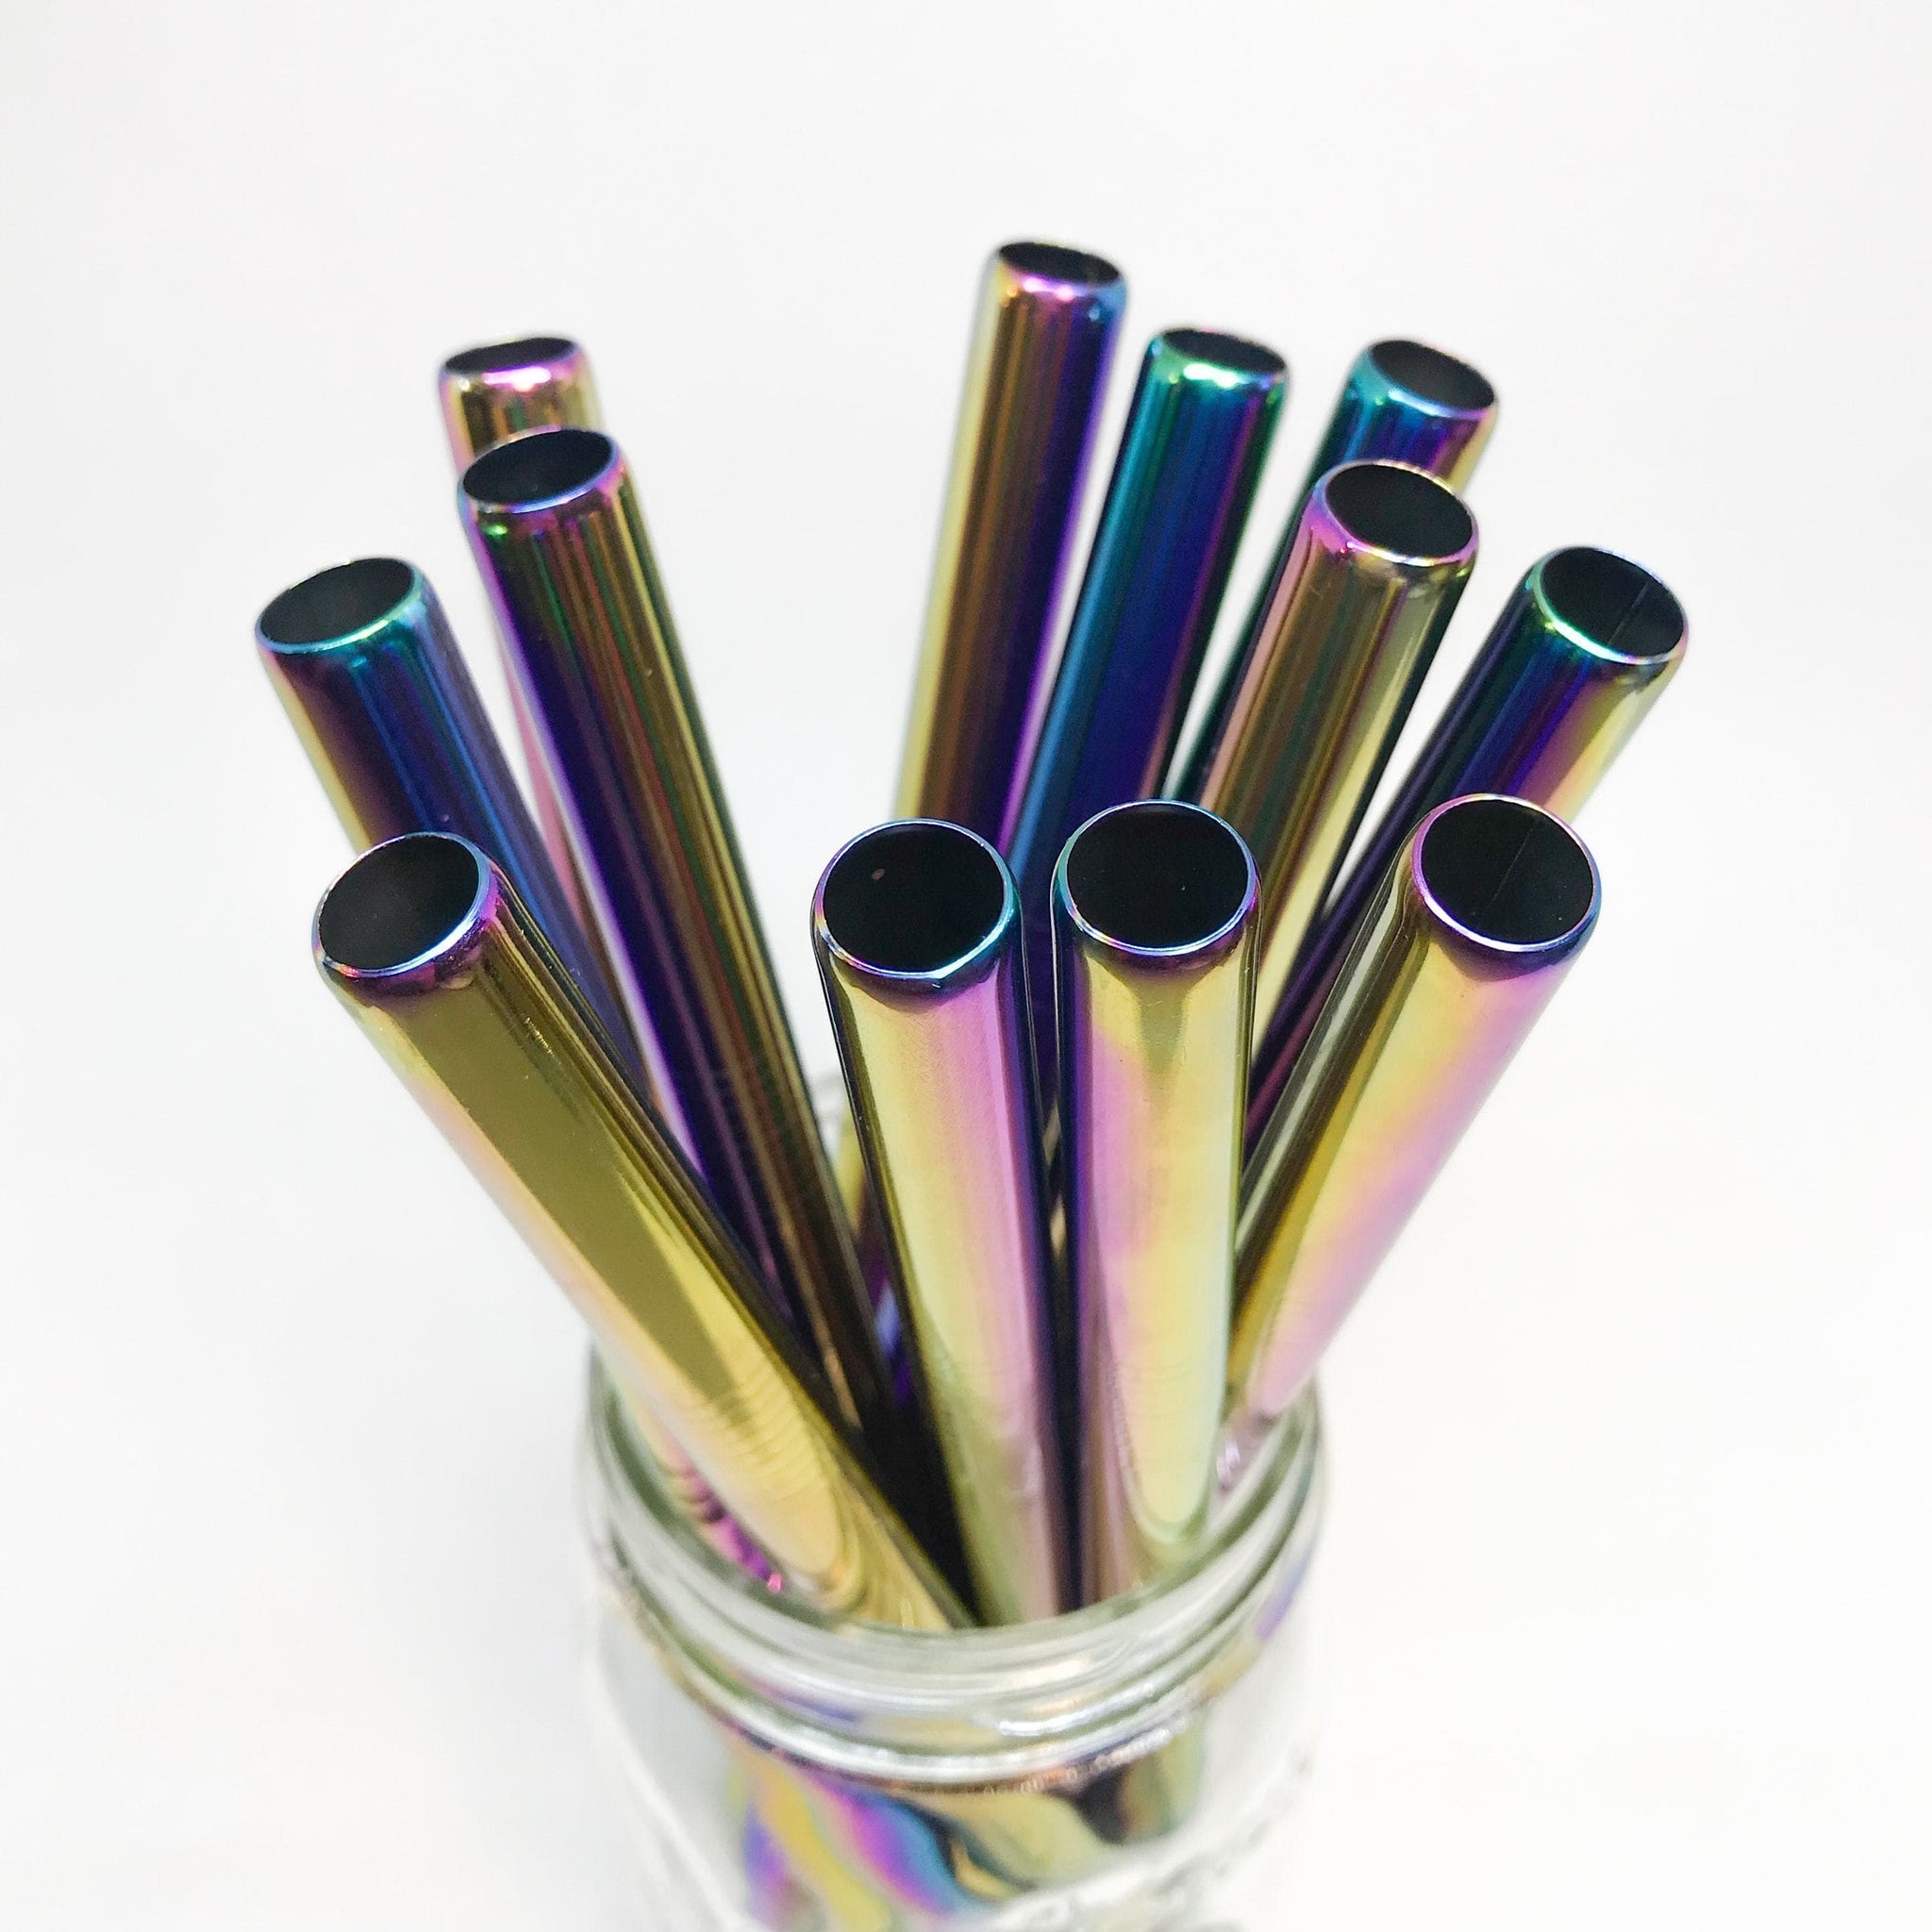 Reusable colored stainless steel straws: Buy Wholesale - Steelys® Straws